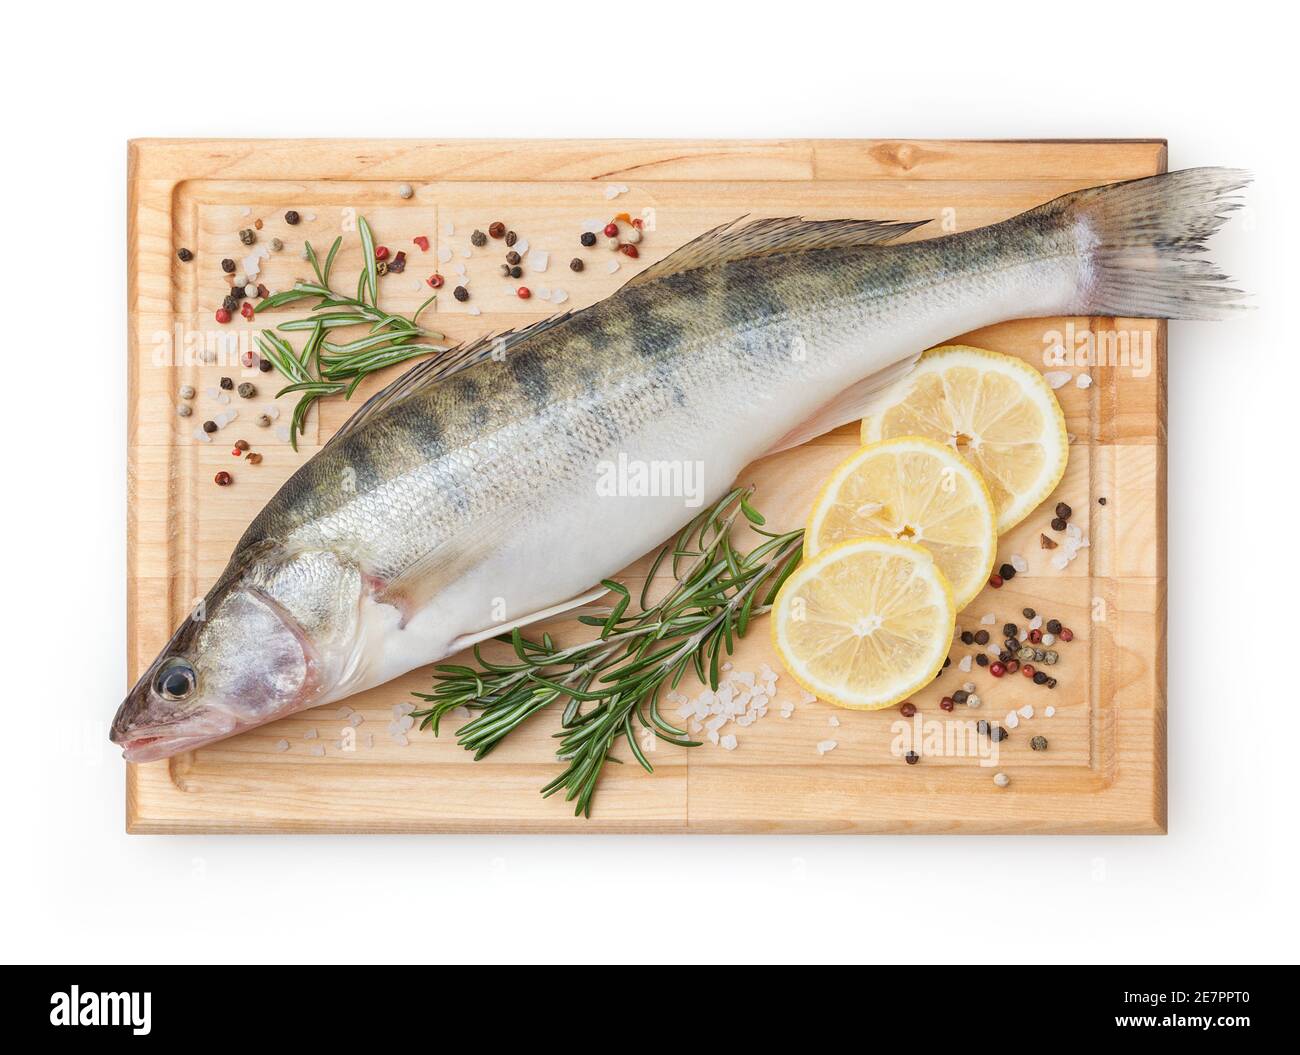 Fresh uncooked pike perch with lemon, rosemary and spice on wooden board isolated on white background with clipping path Stock Photo